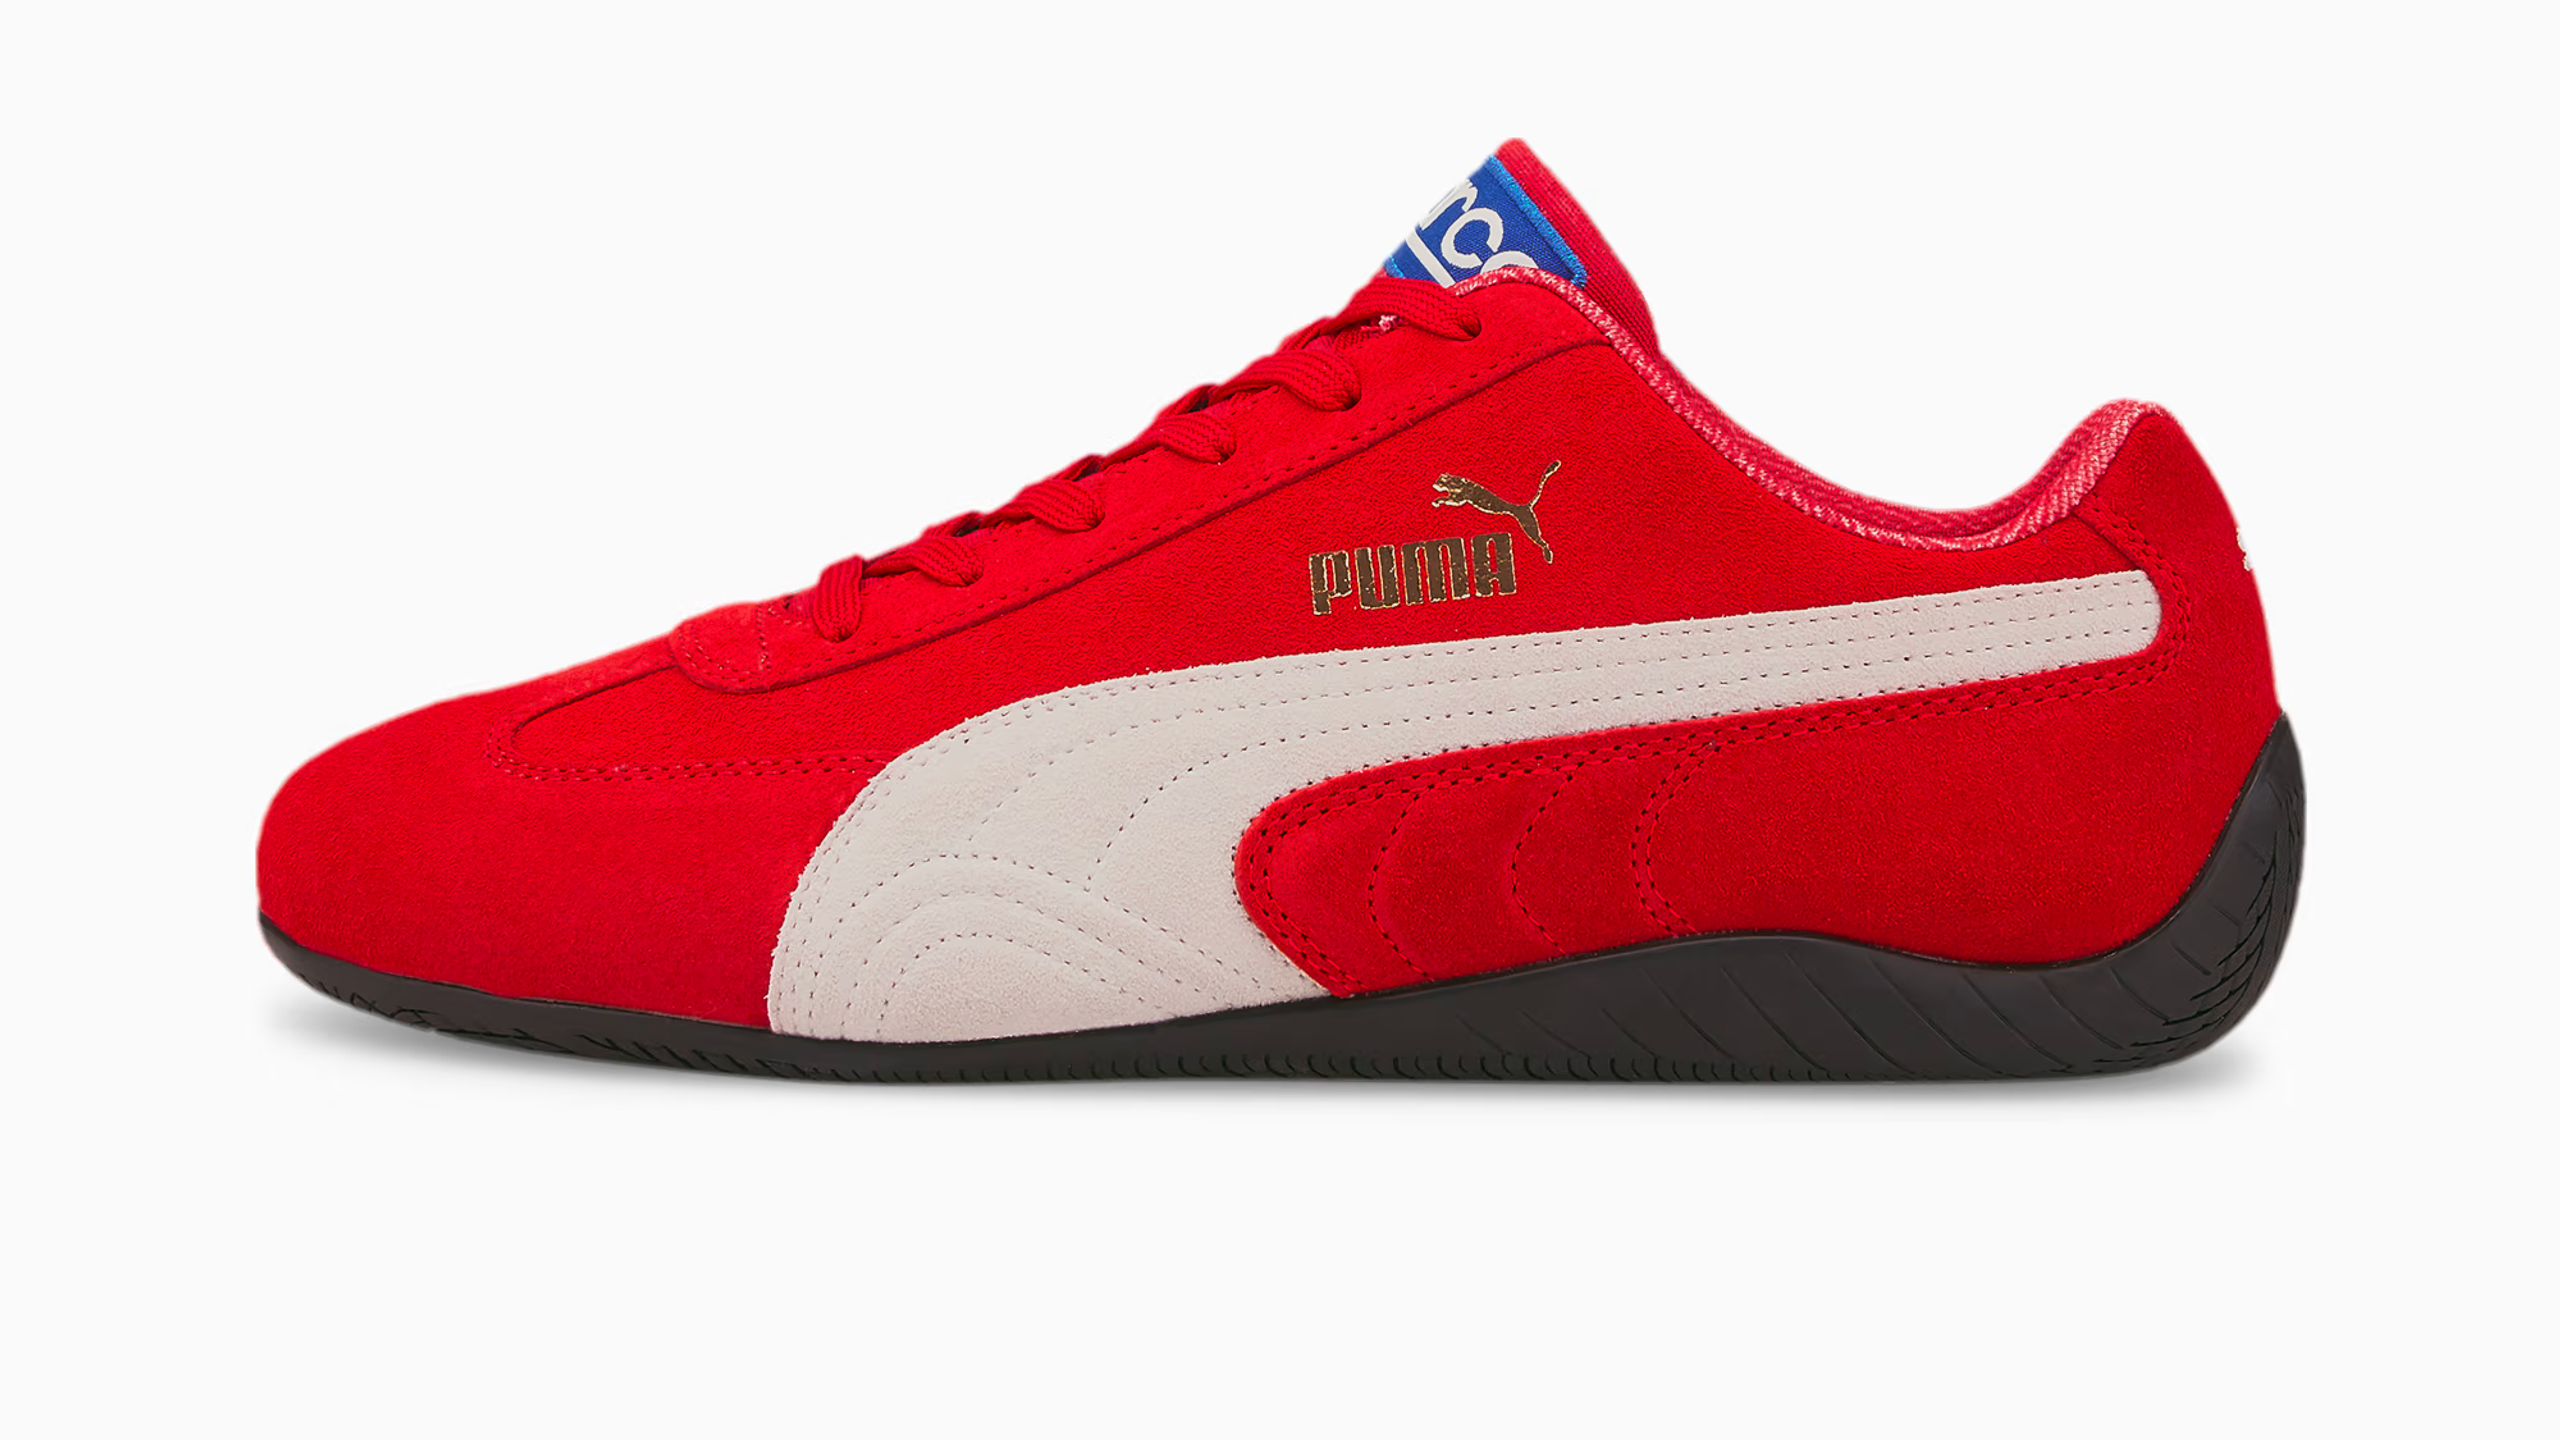 a pair of red and white puma shoes on a white background​​​​‌﻿‍﻿​‍​‍‌‍﻿﻿‌﻿​‍‌‍‍‌‌‍‌﻿‌‍‍‌‌‍﻿‍​‍​‍​﻿‍‍​‍​‍‌﻿​﻿‌‍​‌‌‍﻿‍‌‍‍‌‌﻿‌​‌﻿‍‌​‍﻿‍‌‍‍‌‌‍﻿﻿​‍​‍​‍﻿​​‍​‍‌‍‍​‌﻿​‍‌‍‌‌‌‍‌‍​‍​‍​﻿‍‍​‍​‍‌‍‍​‌﻿‌​‌﻿‌​‌﻿​​​﻿‍‍​‍﻿﻿​‍﻿﻿‌‍﻿​‌‍﻿﻿‌‍​﻿‌‍​‌‌‍﻿​‌‍‍​‌‍﻿﻿‌﻿​﻿‌﻿‌​​﻿‍‍​﻿​﻿​﻿​﻿​﻿​﻿​﻿​﻿​‍﻿﻿‌‍‍‌‌‍﻿‍‌﻿‌​‌‍‌‌‌‍﻿‍‌﻿‌​​‍﻿﻿‌‍‌‌‌‍‌​‌‍‍‌‌﻿‌​​‍﻿﻿‌‍﻿‌‌‍﻿﻿‌‍‌​‌‍‌‌​﻿﻿‌‌﻿​​‌﻿​‍‌‍‌‌‌﻿​﻿‌‍‌‌‌‍﻿‍‌﻿‌​‌‍​‌‌﻿‌​‌‍‍‌‌‍﻿﻿‌‍﻿‍​﻿‍﻿‌‍‍‌‌‍‌​​﻿﻿‌​﻿​​​﻿‌​‌‍‌‌‌‍‌‌‌‍‌‌​﻿​​​﻿​﻿​﻿​‍​‍﻿‌​﻿‌​‌‍‌‌​﻿‌﻿​﻿‍‌​‍﻿‌​﻿‌​​﻿‌‍​﻿‍‌​﻿​‌​‍﻿‌‌‍​‍‌‍​‌​﻿‍​‌‍‌​​‍﻿‌​﻿​‍​﻿​﻿‌‍‌​​﻿‌​​﻿​​​﻿​﻿​﻿‌​​﻿​​​﻿‌​​﻿‌​​﻿‌‍​﻿​‍​﻿‍﻿‌﻿‌​‌﻿‍‌‌﻿​​‌‍‌‌​﻿﻿‌‌﻿​﻿‌‍‍​‌‍﻿﻿‌‍‌‌​﻿‍﻿‌﻿​​‌‍​‌‌﻿‌​‌‍‍​​﻿﻿‌‌‍﻿‌‌‍‌‌‌‍‌​‌‍‍‌‌‍​‌​‍‌‌​﻿‌‌‌​​‍‌‌﻿﻿‌‍‍﻿‌‍‌‌‌﻿‍‌​‍‌‌​﻿​﻿‌​‌​​‍‌‌​﻿​﻿‌​‌​​‍‌‌​﻿​‍​﻿​‍‌‍‌​‌‍‌‌​﻿‌​​﻿​‍​﻿‌​​﻿‌﻿​﻿​​‌‍​‌​﻿‌‍‌‍‌​​﻿‌﻿‌‍‌‌​‍‌‌​﻿​‍​﻿​‍​‍‌‌​﻿‌‌‌​‌​​‍﻿‍‌‍​‌‌‍﻿​‌﻿‌​​﻿﻿﻿‌‍​‍‌‍​‌‌﻿​﻿‌‍‌‌‌‌‌‌‌﻿​‍‌‍﻿​​﻿﻿‌‌‍‍​‌﻿‌​‌﻿‌​‌﻿​​​‍‌‌​﻿​﻿‌​​‌​‍‌‌​﻿​‍‌​‌‍​‍‌‌​﻿​‍‌​‌‍‌‍﻿​‌‍﻿﻿‌‍​﻿‌‍​‌‌‍﻿​‌‍‍​‌‍﻿﻿‌﻿​﻿‌﻿‌​​‍‌‌​﻿​﻿‌​​‌​﻿​﻿​﻿​﻿​﻿​﻿​﻿​﻿​‍‌‍‌‍‍‌‌‍‌​​﻿﻿‌​﻿​​​﻿‌​‌‍‌‌‌‍‌‌‌‍‌‌​﻿​​​﻿​﻿​﻿​‍​‍﻿‌​﻿‌​‌‍‌‌​﻿‌﻿​﻿‍‌​‍﻿‌​﻿‌​​﻿‌‍​﻿‍‌​﻿​‌​‍﻿‌‌‍​‍‌‍​‌​﻿‍​‌‍‌​​‍﻿‌​﻿​‍​﻿​﻿‌‍‌​​﻿‌​​﻿​​​﻿​﻿​﻿‌​​﻿​​​﻿‌​​﻿‌​​﻿‌‍​﻿​‍​‍‌‍‌﻿‌​‌﻿‍‌‌﻿​​‌‍‌‌​﻿﻿‌‌﻿​﻿‌‍‍​‌‍﻿﻿‌‍‌‌​‍‌‍‌﻿​​‌‍​‌‌﻿‌​‌‍‍​​﻿﻿‌‌‍﻿‌‌‍‌‌‌‍‌​‌‍‍‌‌‍​‌​‍‌‌​﻿‌‌‌​​‍‌‌﻿﻿‌‍‍﻿‌‍‌‌‌﻿‍‌​‍‌‌​﻿​﻿‌​‌​​‍‌‌​﻿​﻿‌​‌​​‍‌‌​﻿​‍​﻿​‍‌‍‌​‌‍‌‌​﻿‌​​﻿​‍​﻿‌​​﻿‌﻿​﻿​​‌‍​‌​﻿‌‍‌‍‌​​﻿‌﻿‌‍‌‌​‍‌‌​﻿​‍​﻿​‍​‍‌‌​﻿‌‌‌​‌​​‍﻿‍‌‍​‌‌‍﻿​‌﻿‌​​‍​‍‌﻿﻿‌